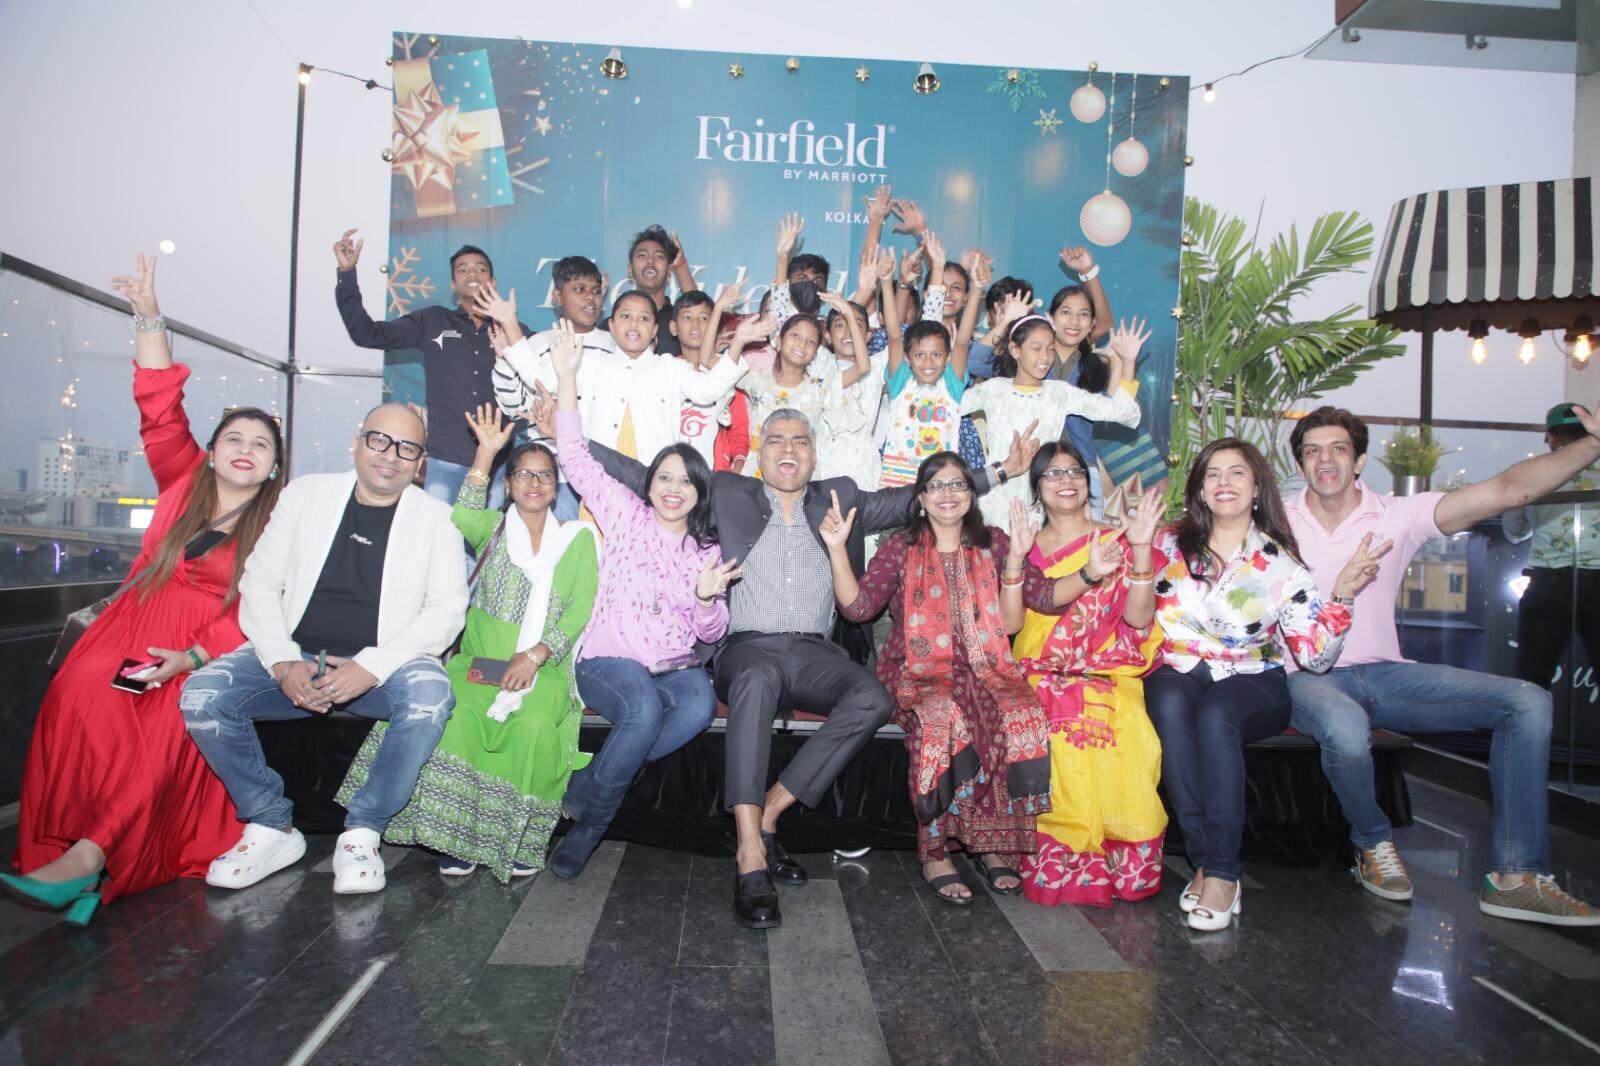 Fairfield By Marriott Kolkata joined hands with Treasures of Innocence to Illuminate the Spirit of Giving in a Heartwarming Cake Mixing Ceremony